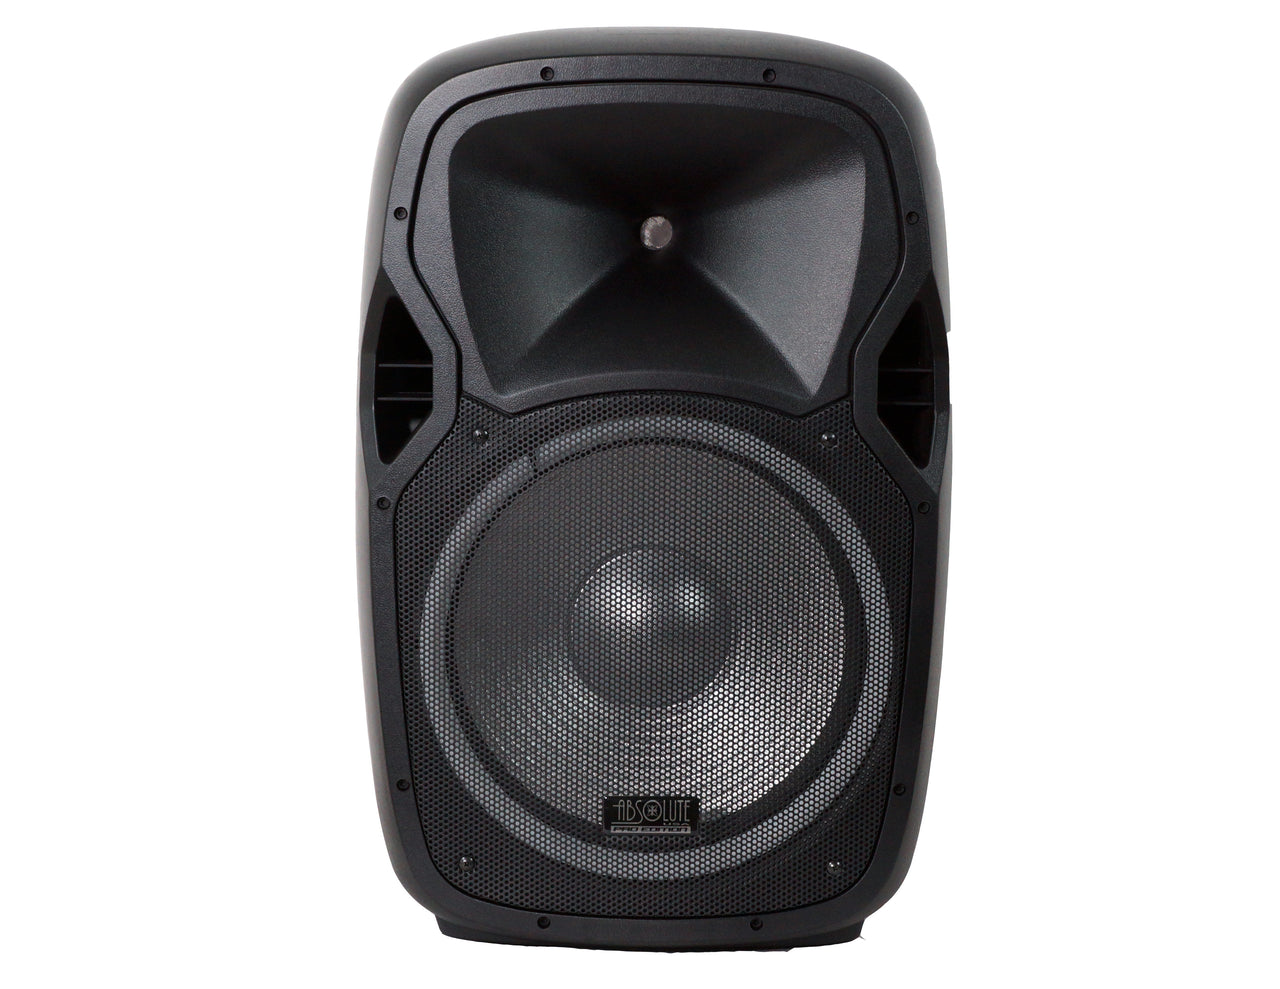 Absolute USA USPROBAT15 Pro Audio Indoor Outdoor Ultra Powerful DJ Bluetooth 3500W Watts Peak, 15" Inch Woofer, Rollable Trolley Speaker with Built in Media Player, FM Radio Tuner, USB, SD Card Rechargeable